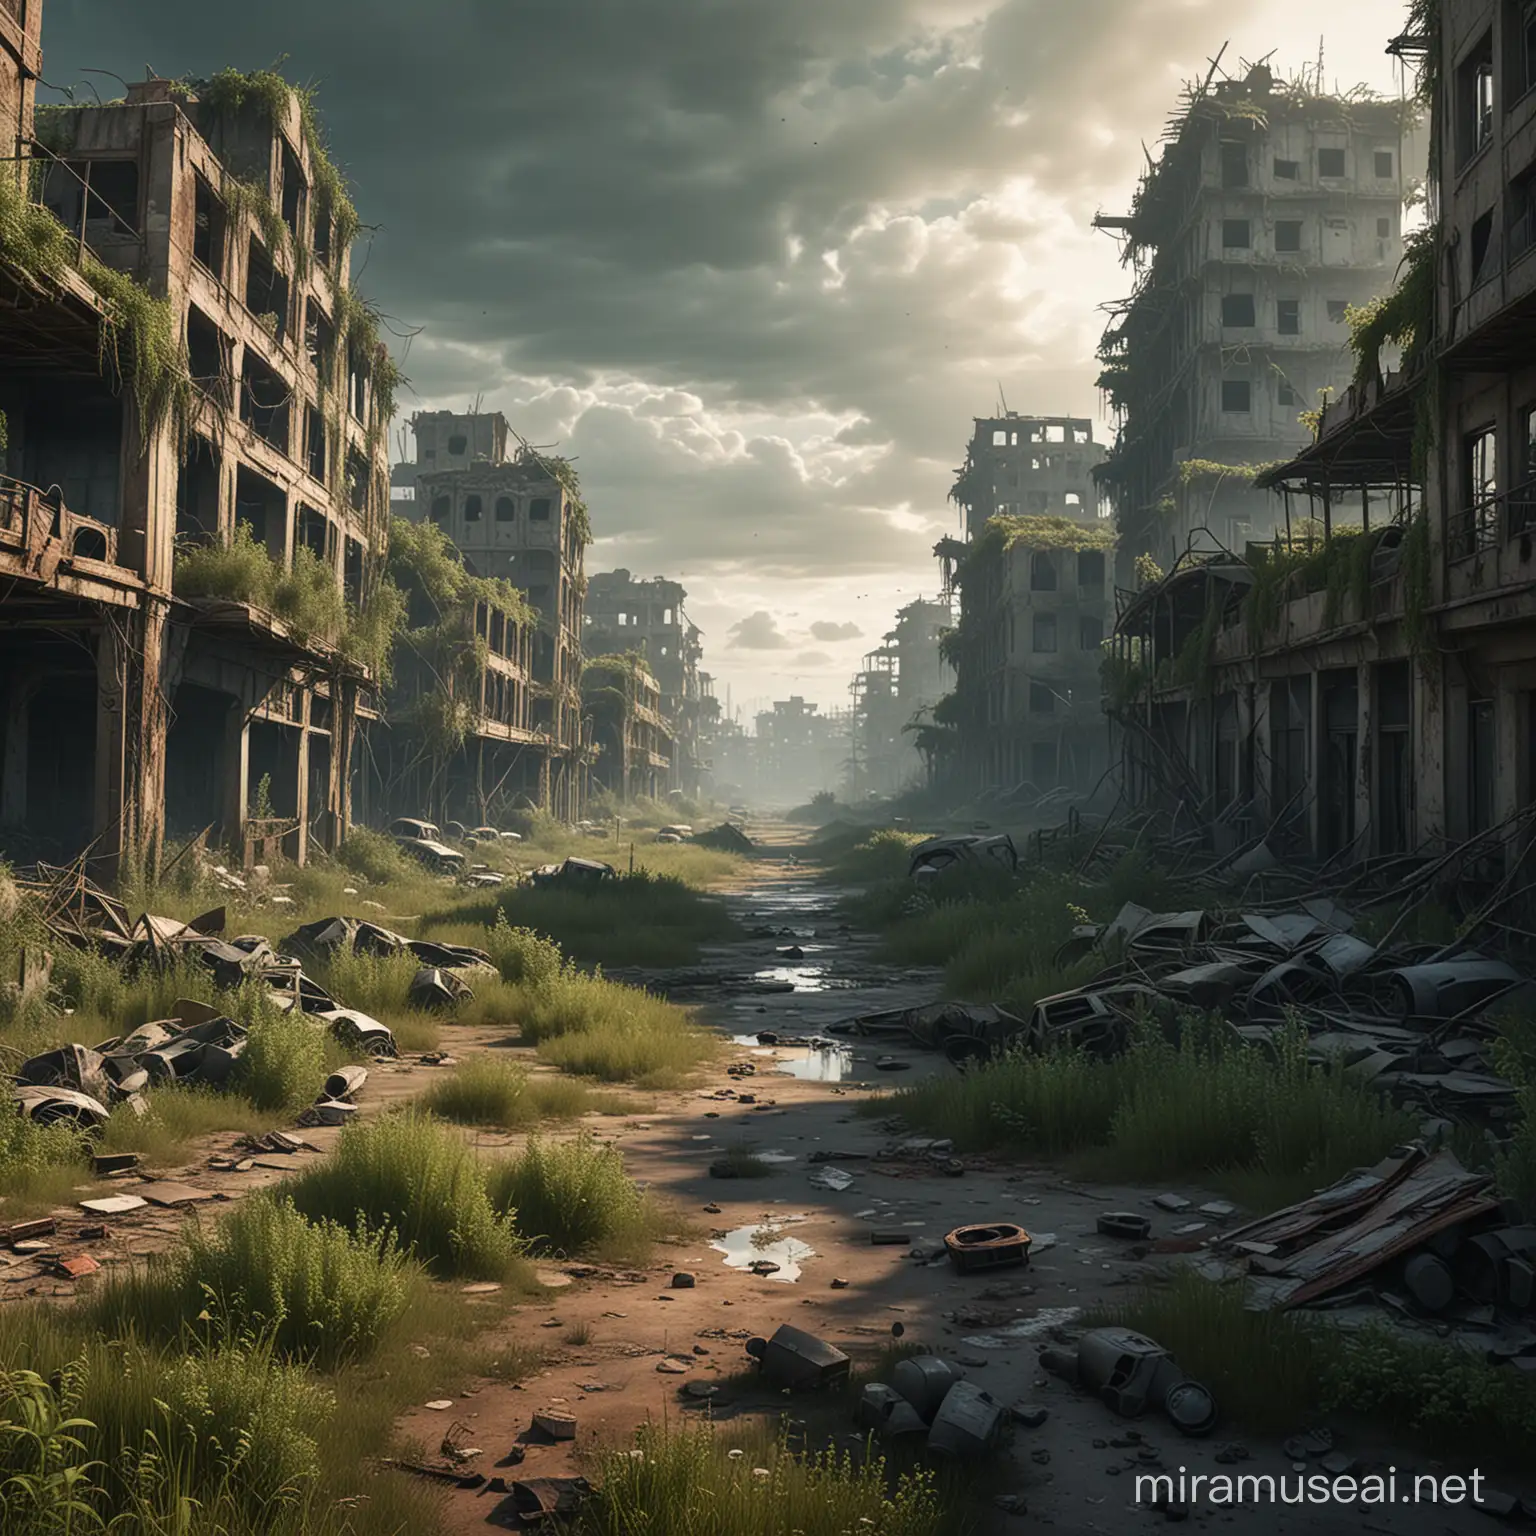 City in ruins in port apocalyptic scene the city is slowing regaining nature aspects like overgrown grass and vines.